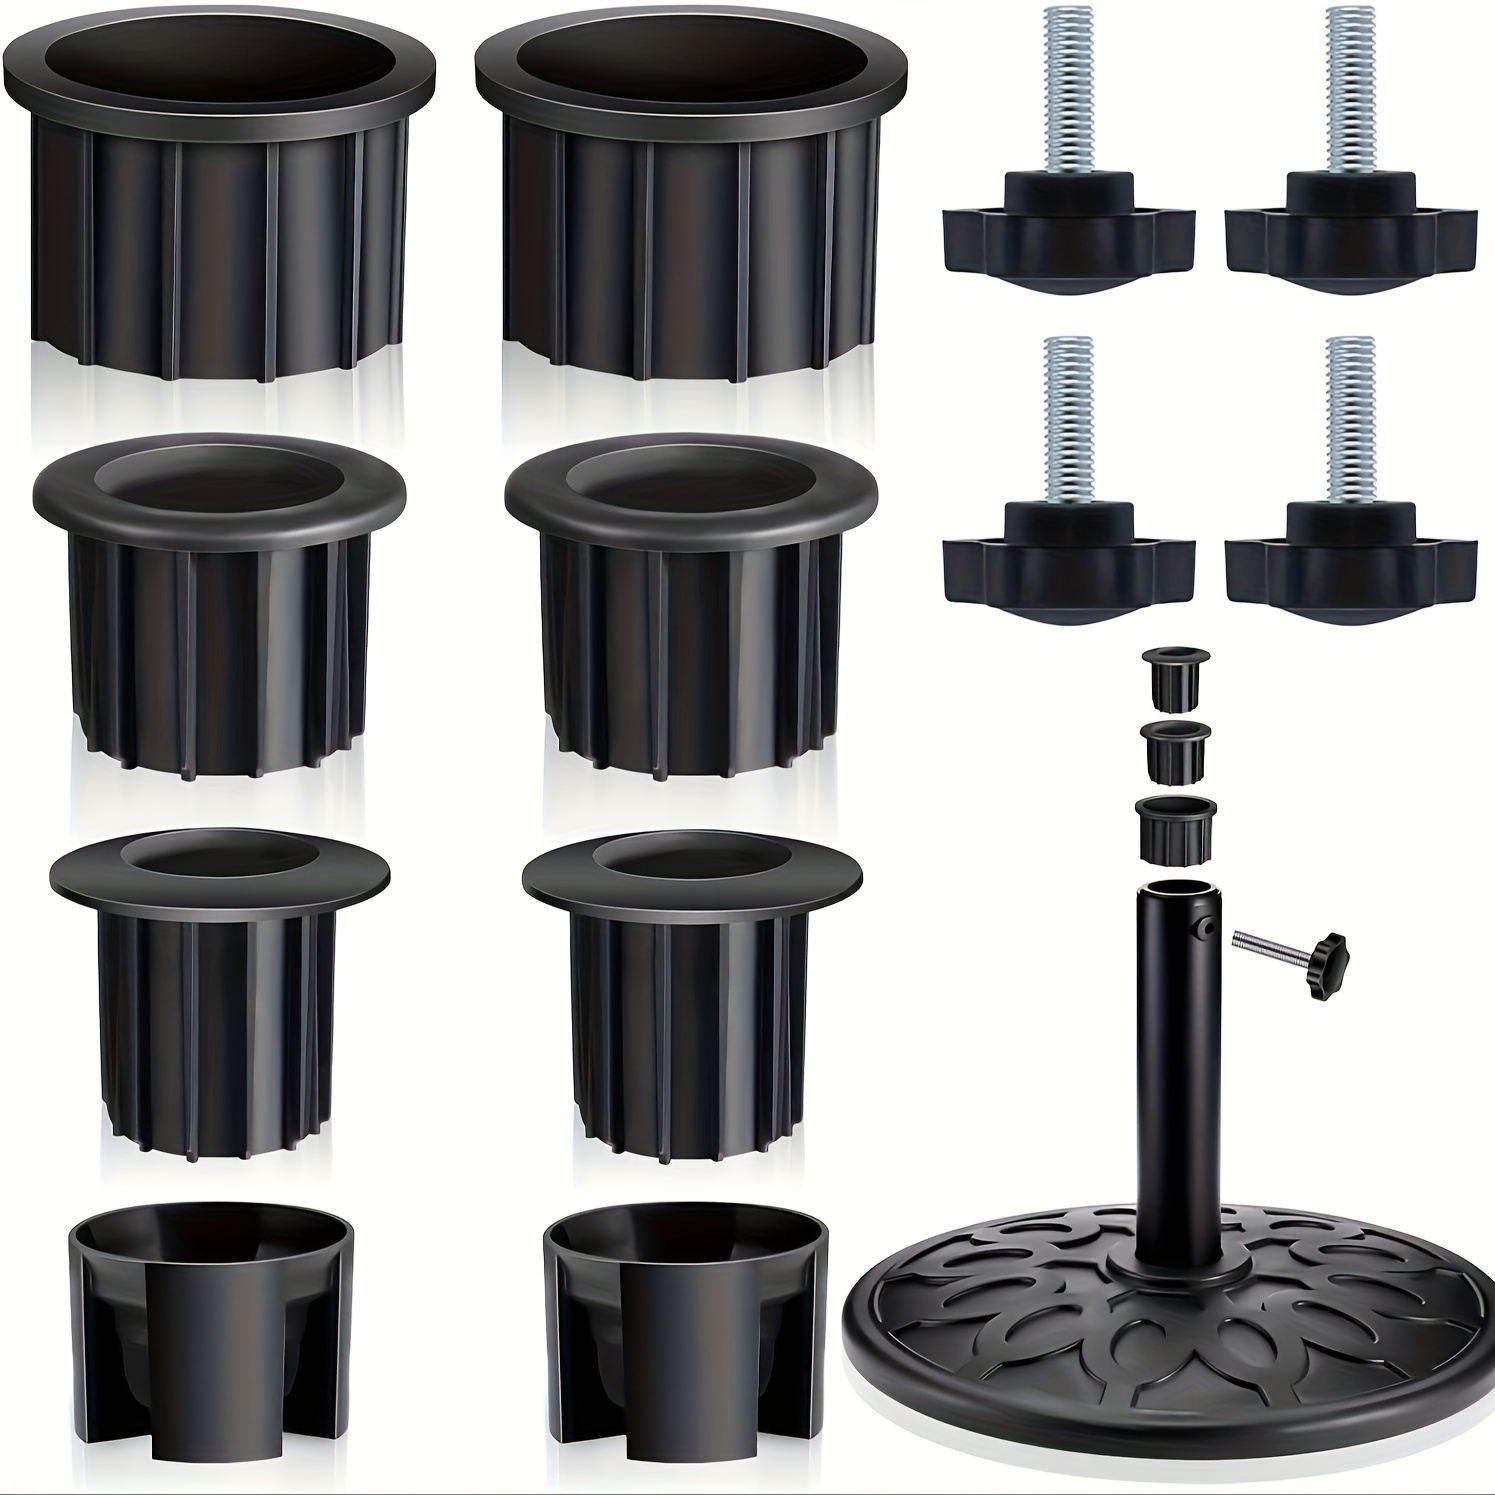 

1pc Sunshade Umbrella Base Set - Includes 2 Each Of 28mm, 38mm, 48mm Sleeves + 2 Slanted Caps + 4 Screws For Stable Outdoor Patio Umbrella Support